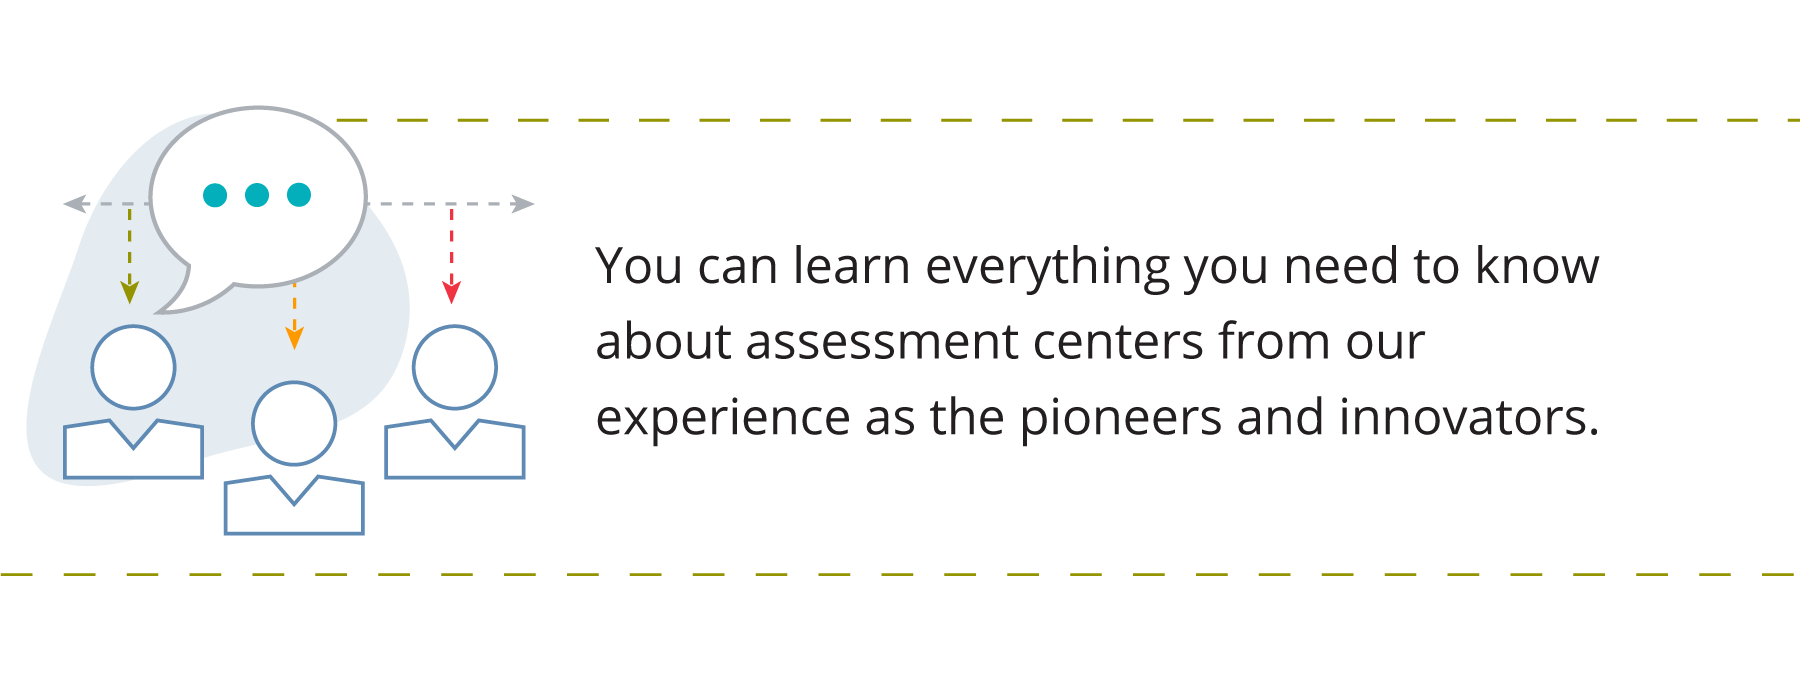 Graphic showing three people, demonstrating experience in an assessment center. Accompanied by text that says 